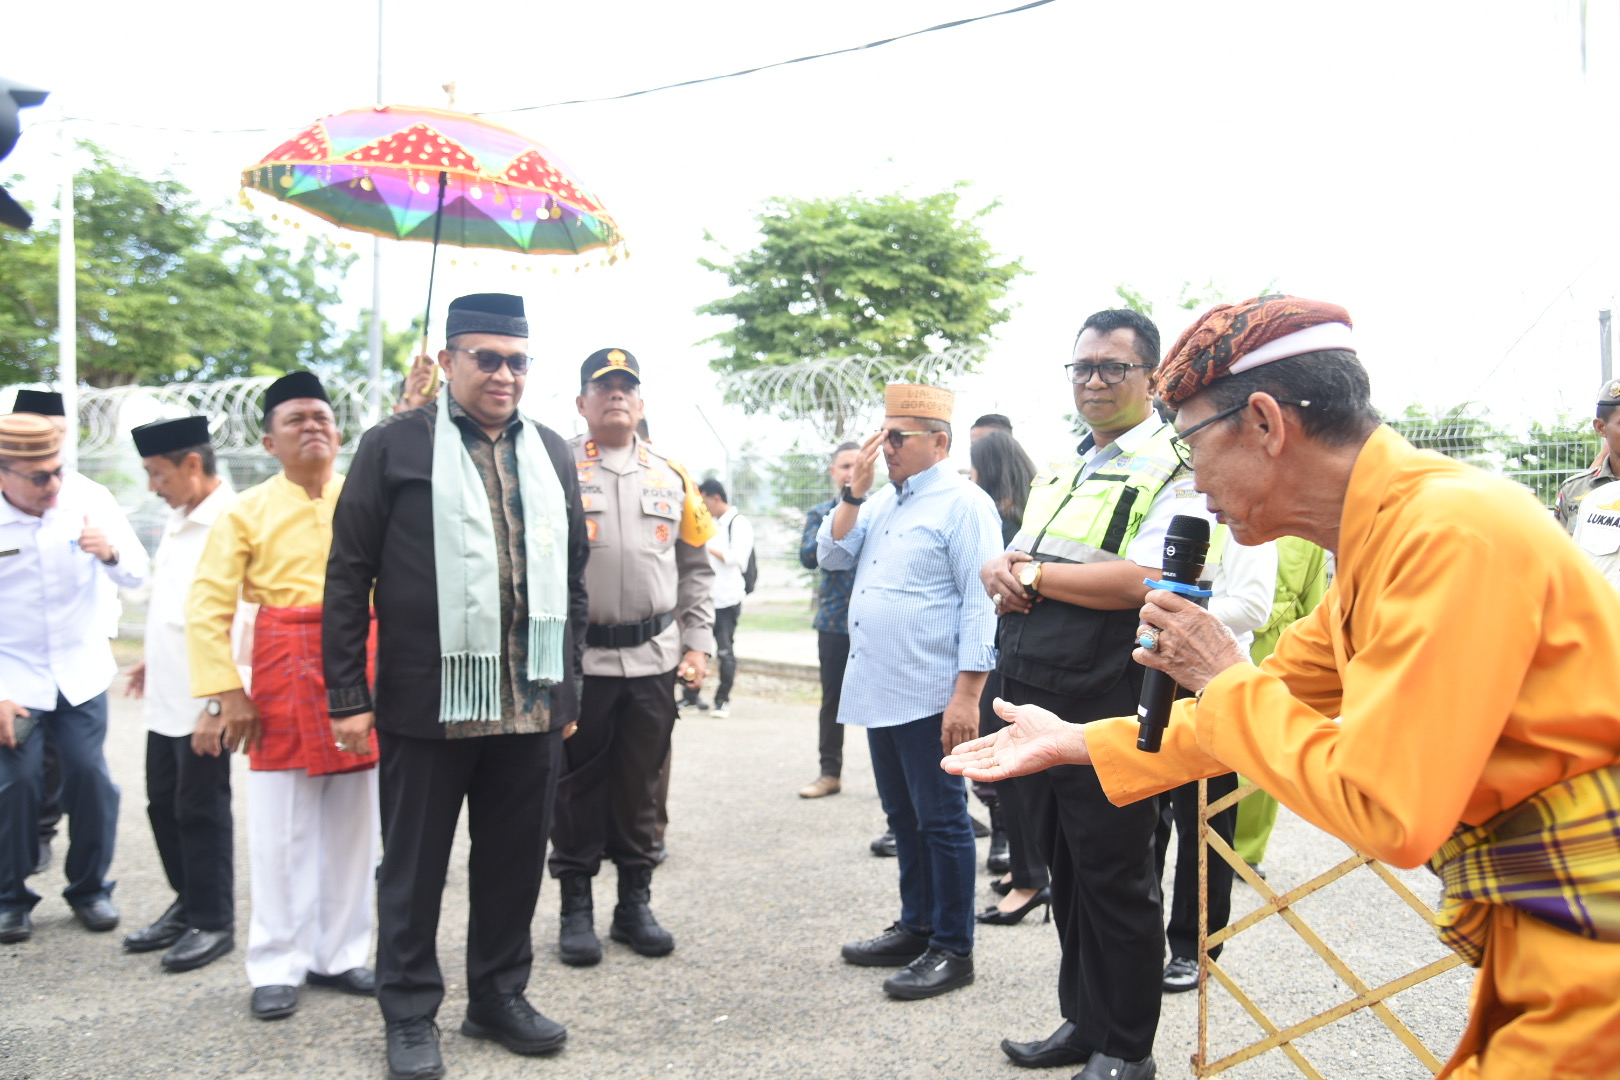  Deputy Manpower Landed in Gorontalo for two-day Working Visit 